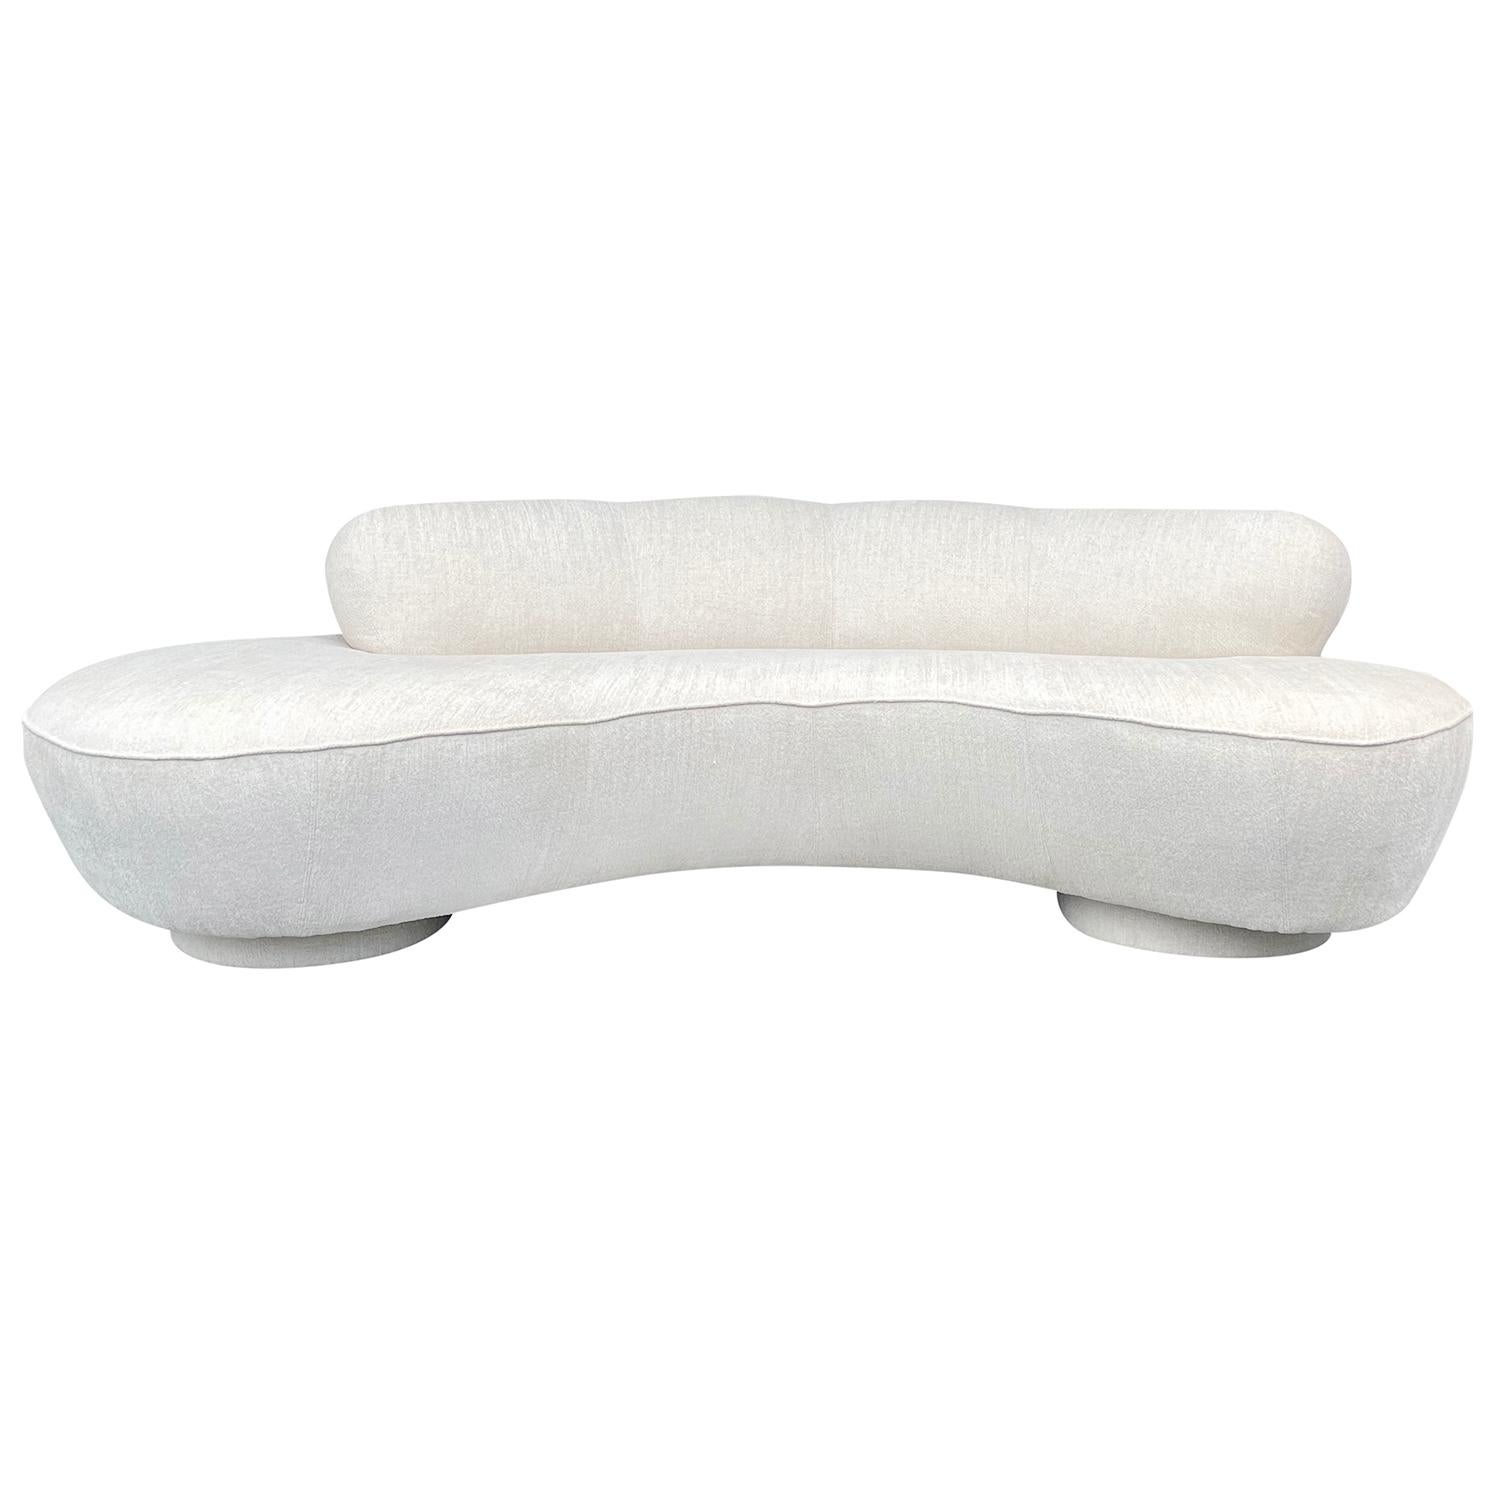 Mid-Century Modern 20th Century White American Directional Sofa, Curved Settee by Vladimir Kagan For Sale